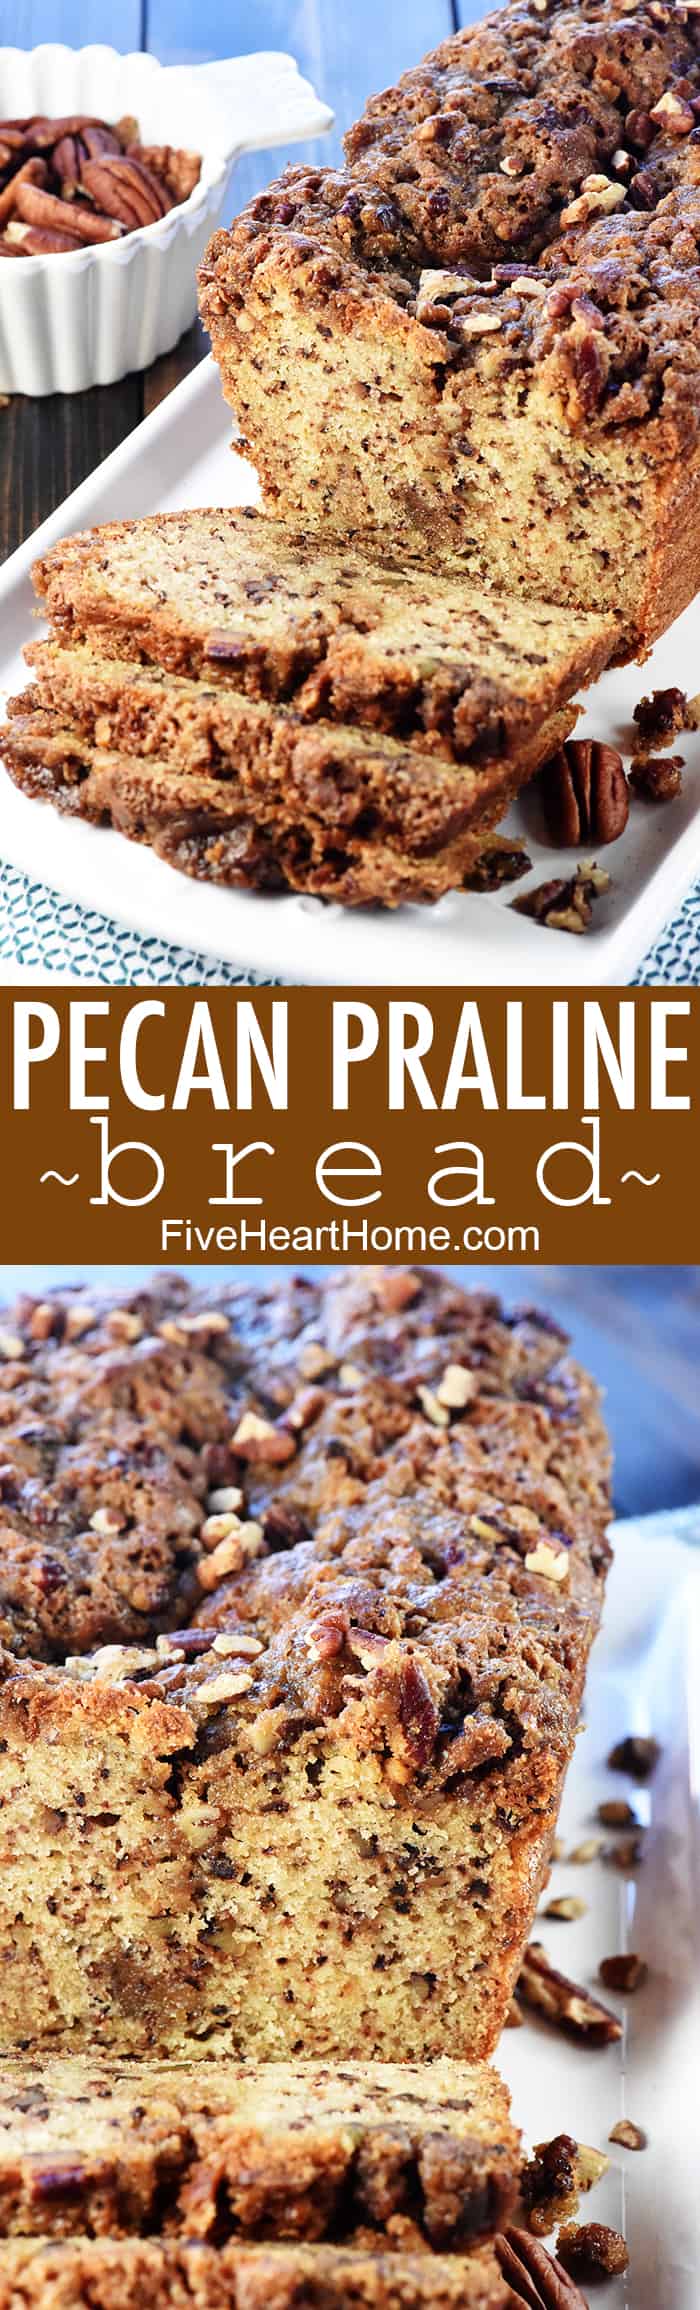 Pecan Praline Bread ~ a delicious quick bread recipe with a tender crumb and a ribbon of brown sugar pecans for added sweetness and crunch! | FiveHeartHome.com via @fivehearthome